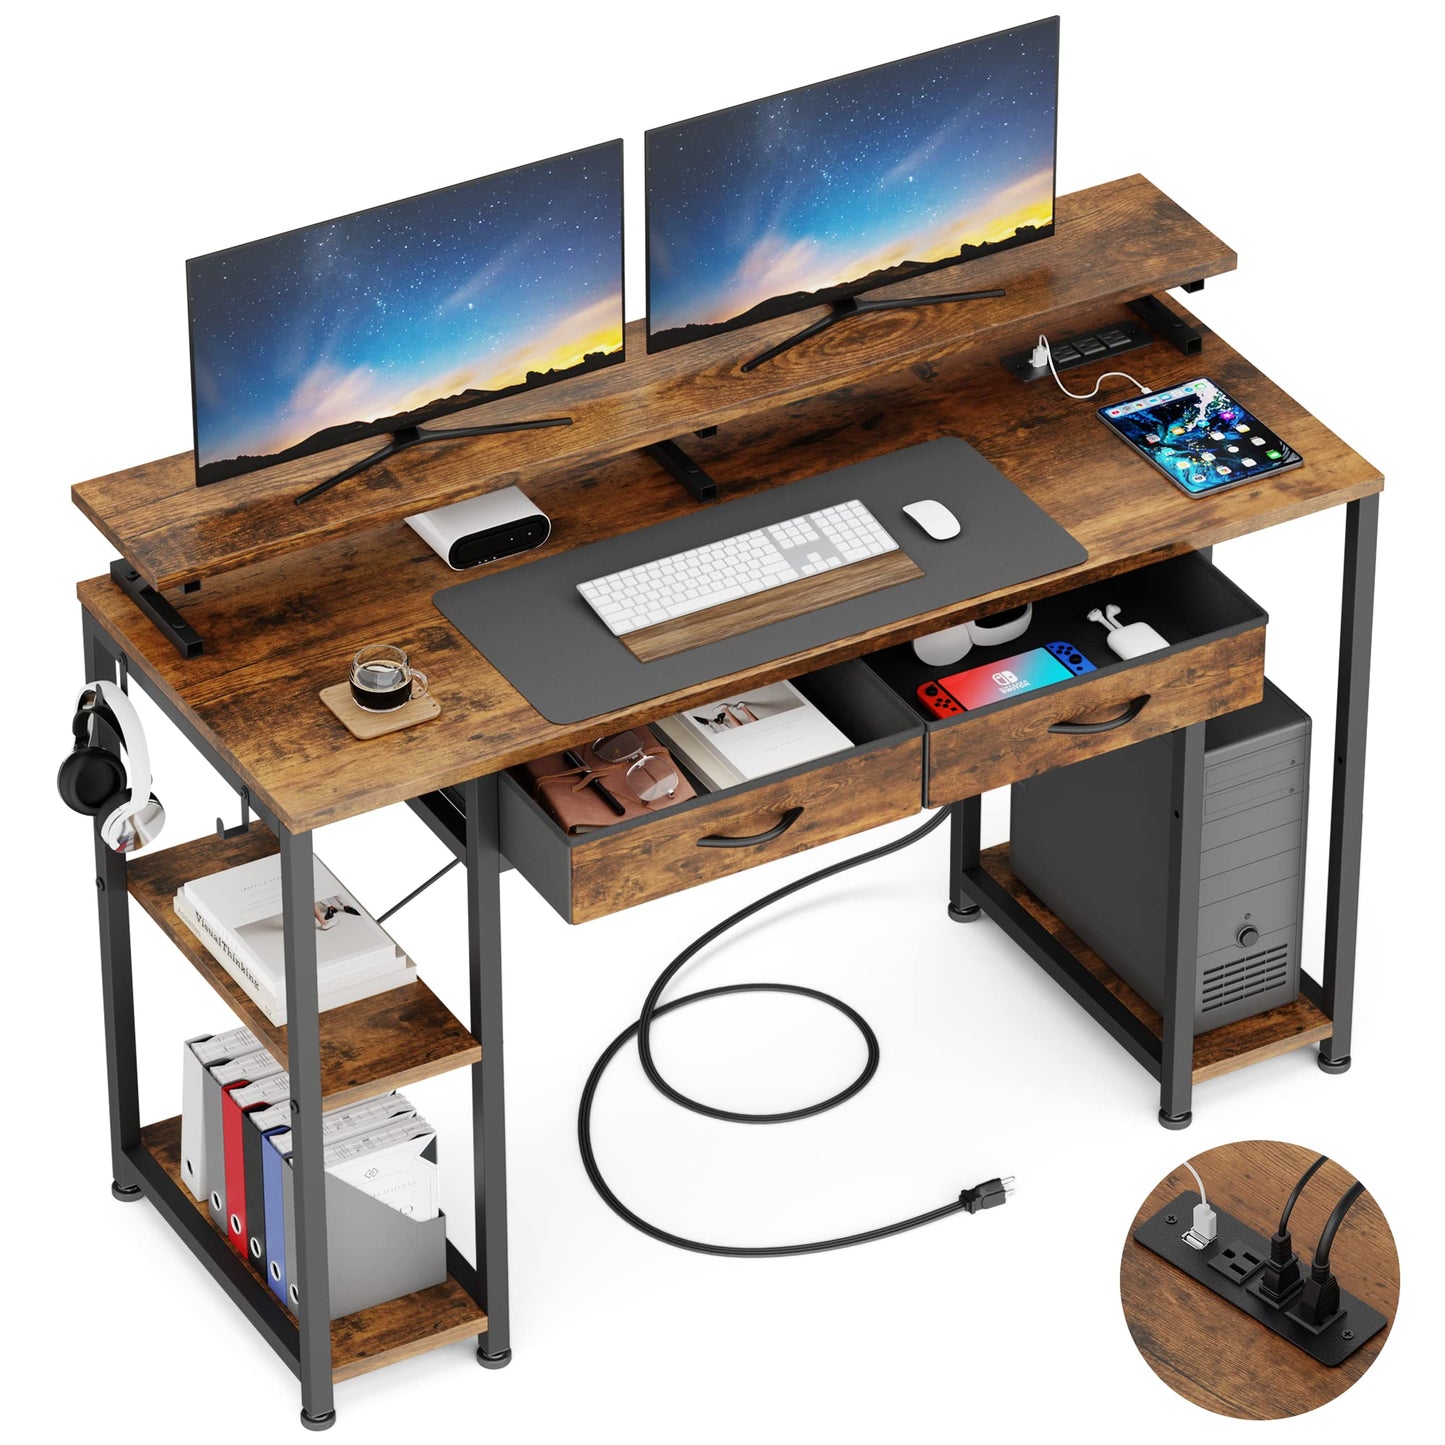 GIKPAL Computer Desk 47" Table Office Desk with Drawers& Storage Shelves&Power Outlets, Home Work Writing Desk & Large Space Monitor Stand, Rustic Brown